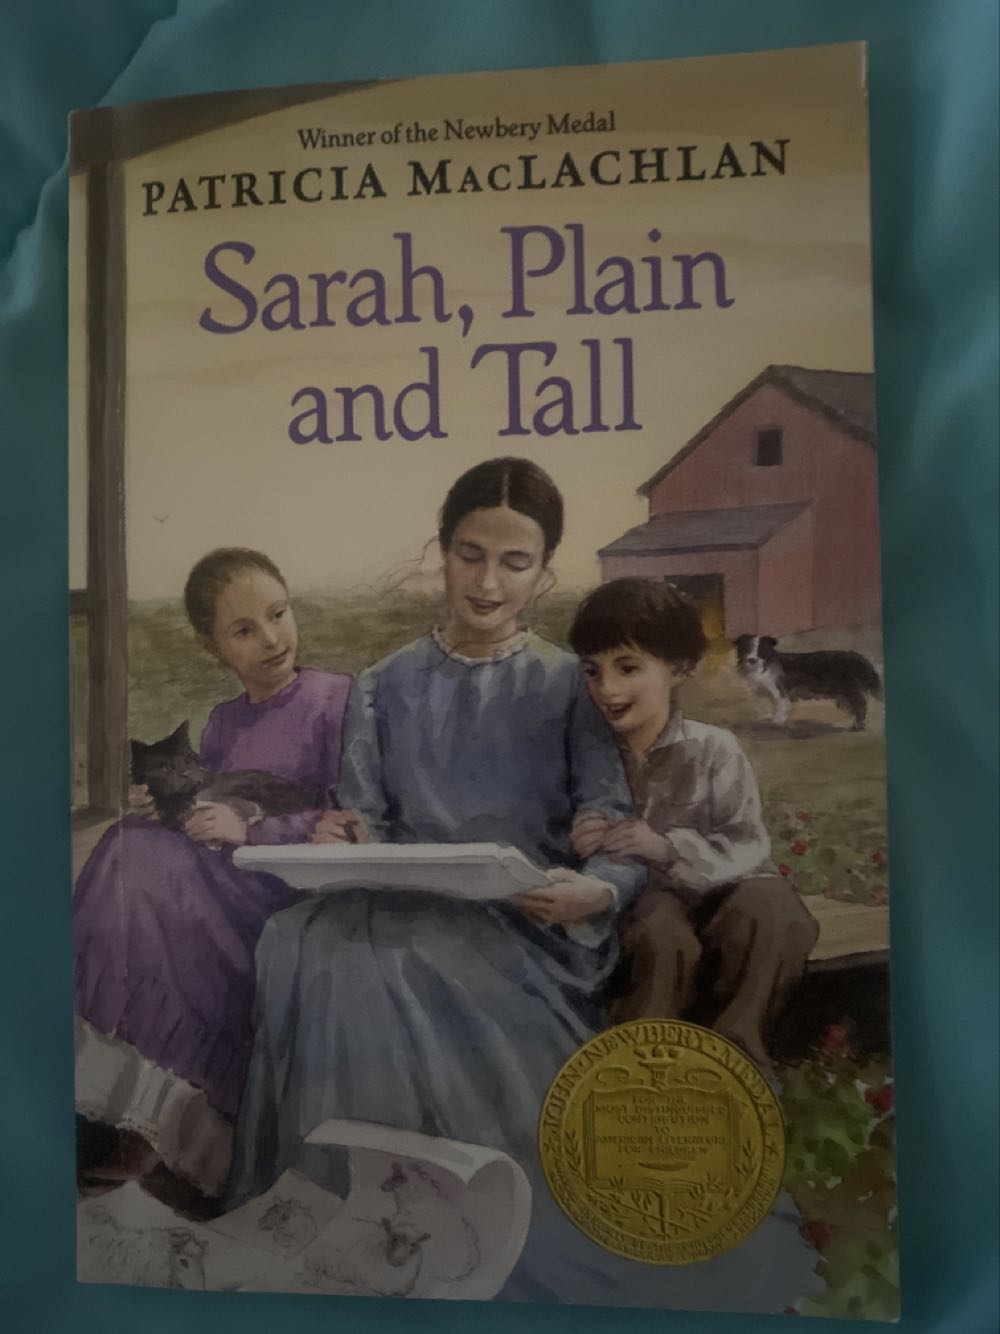 Sarah, Plain and Tall - Patricia MacLachlan (Harper Collins - Paperback) book collectible [Barcode 9780064402057] - Main Image 3